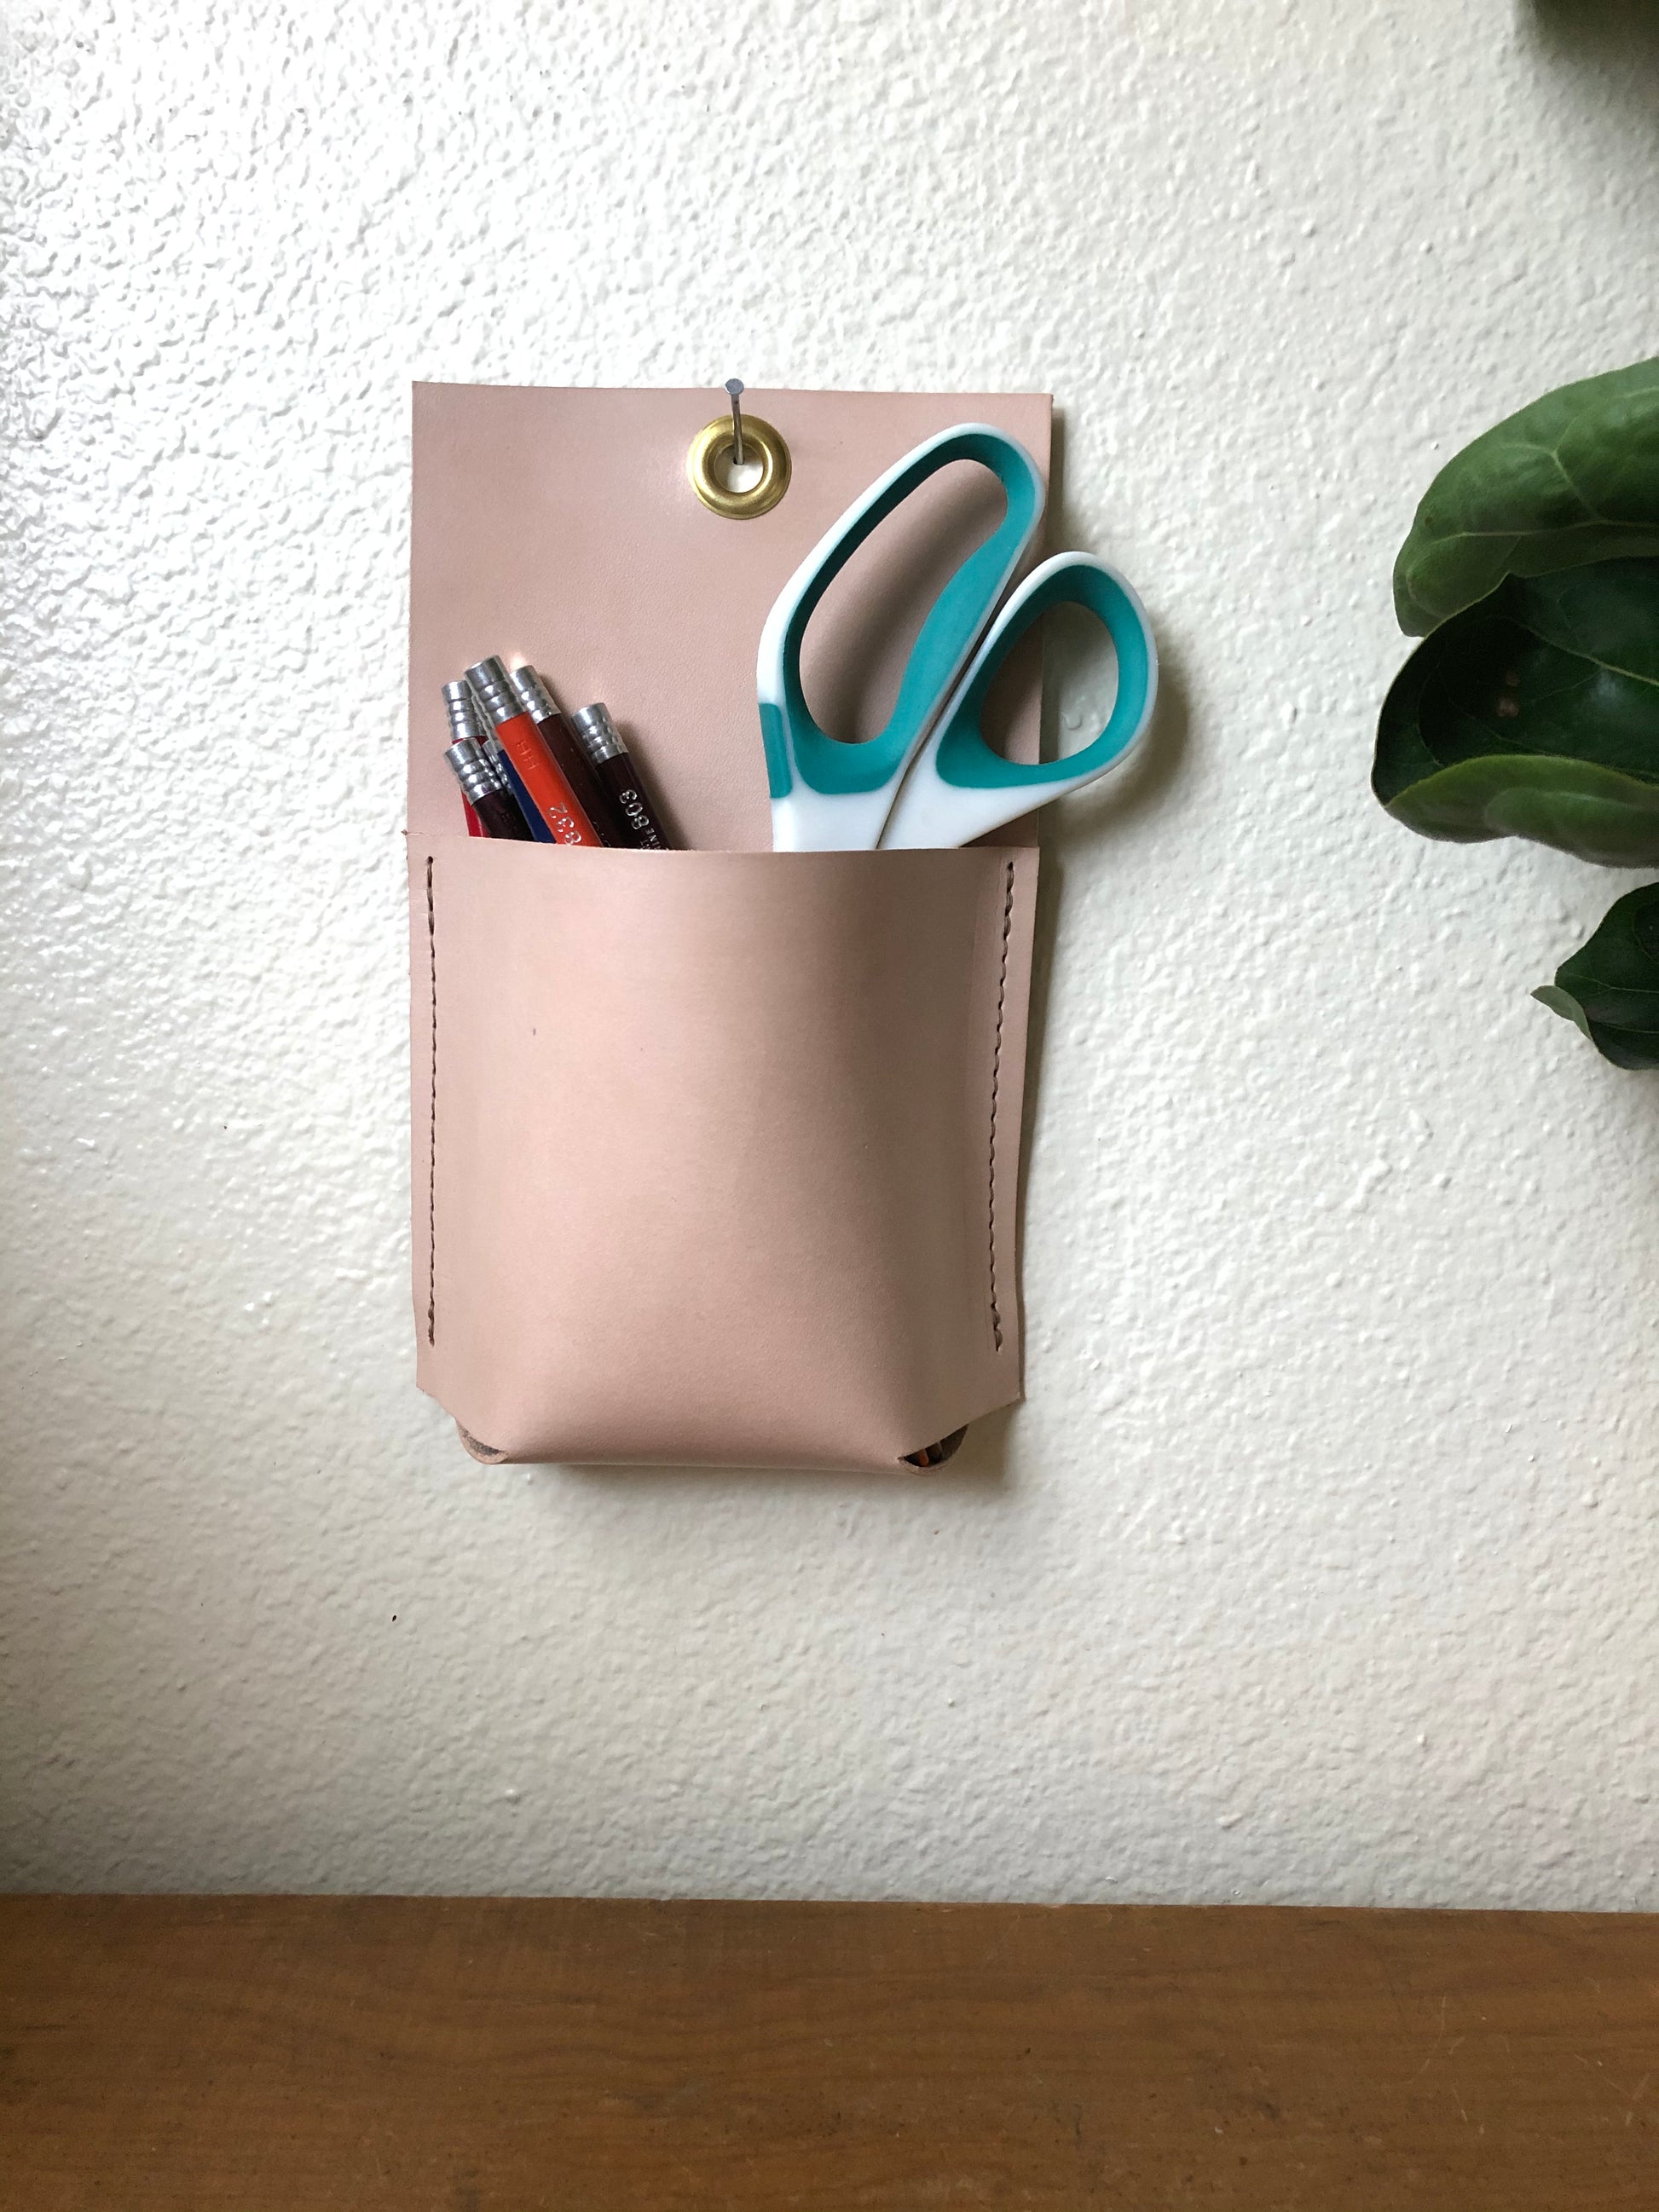 Modern, nude wall pocket holds pencils and scissors.